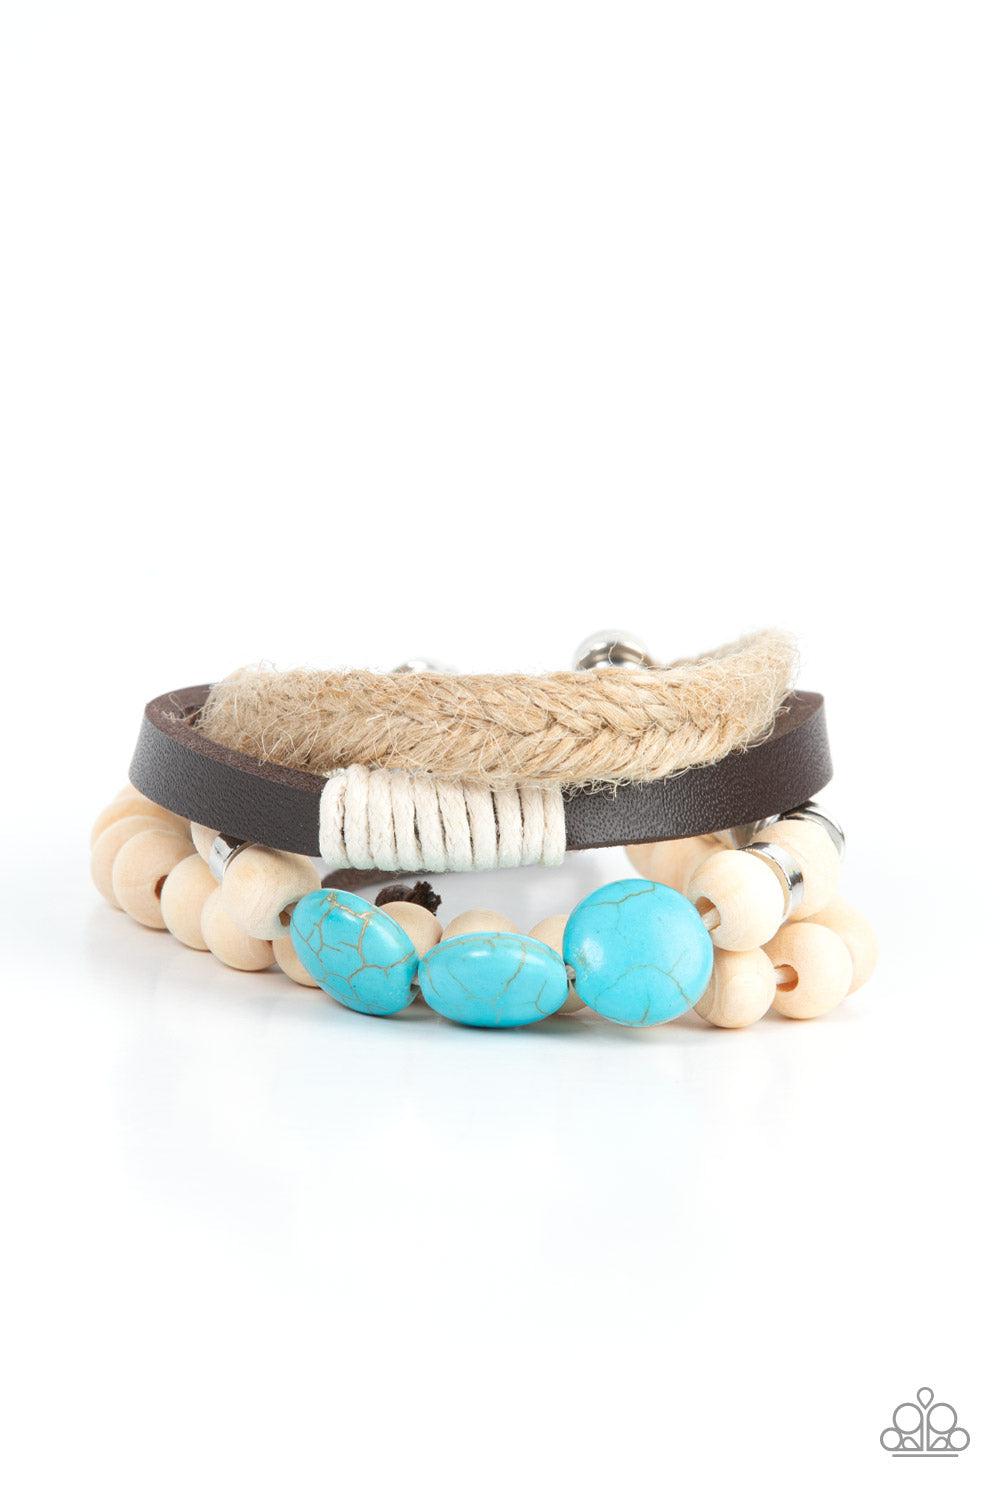 DRIFTER Away Turquoise Blue Stone &amp; White Wood Urban Bracelet - Paparazzi Accessories- lightbox - CarasShop.com - $5 Jewelry by Cara Jewels